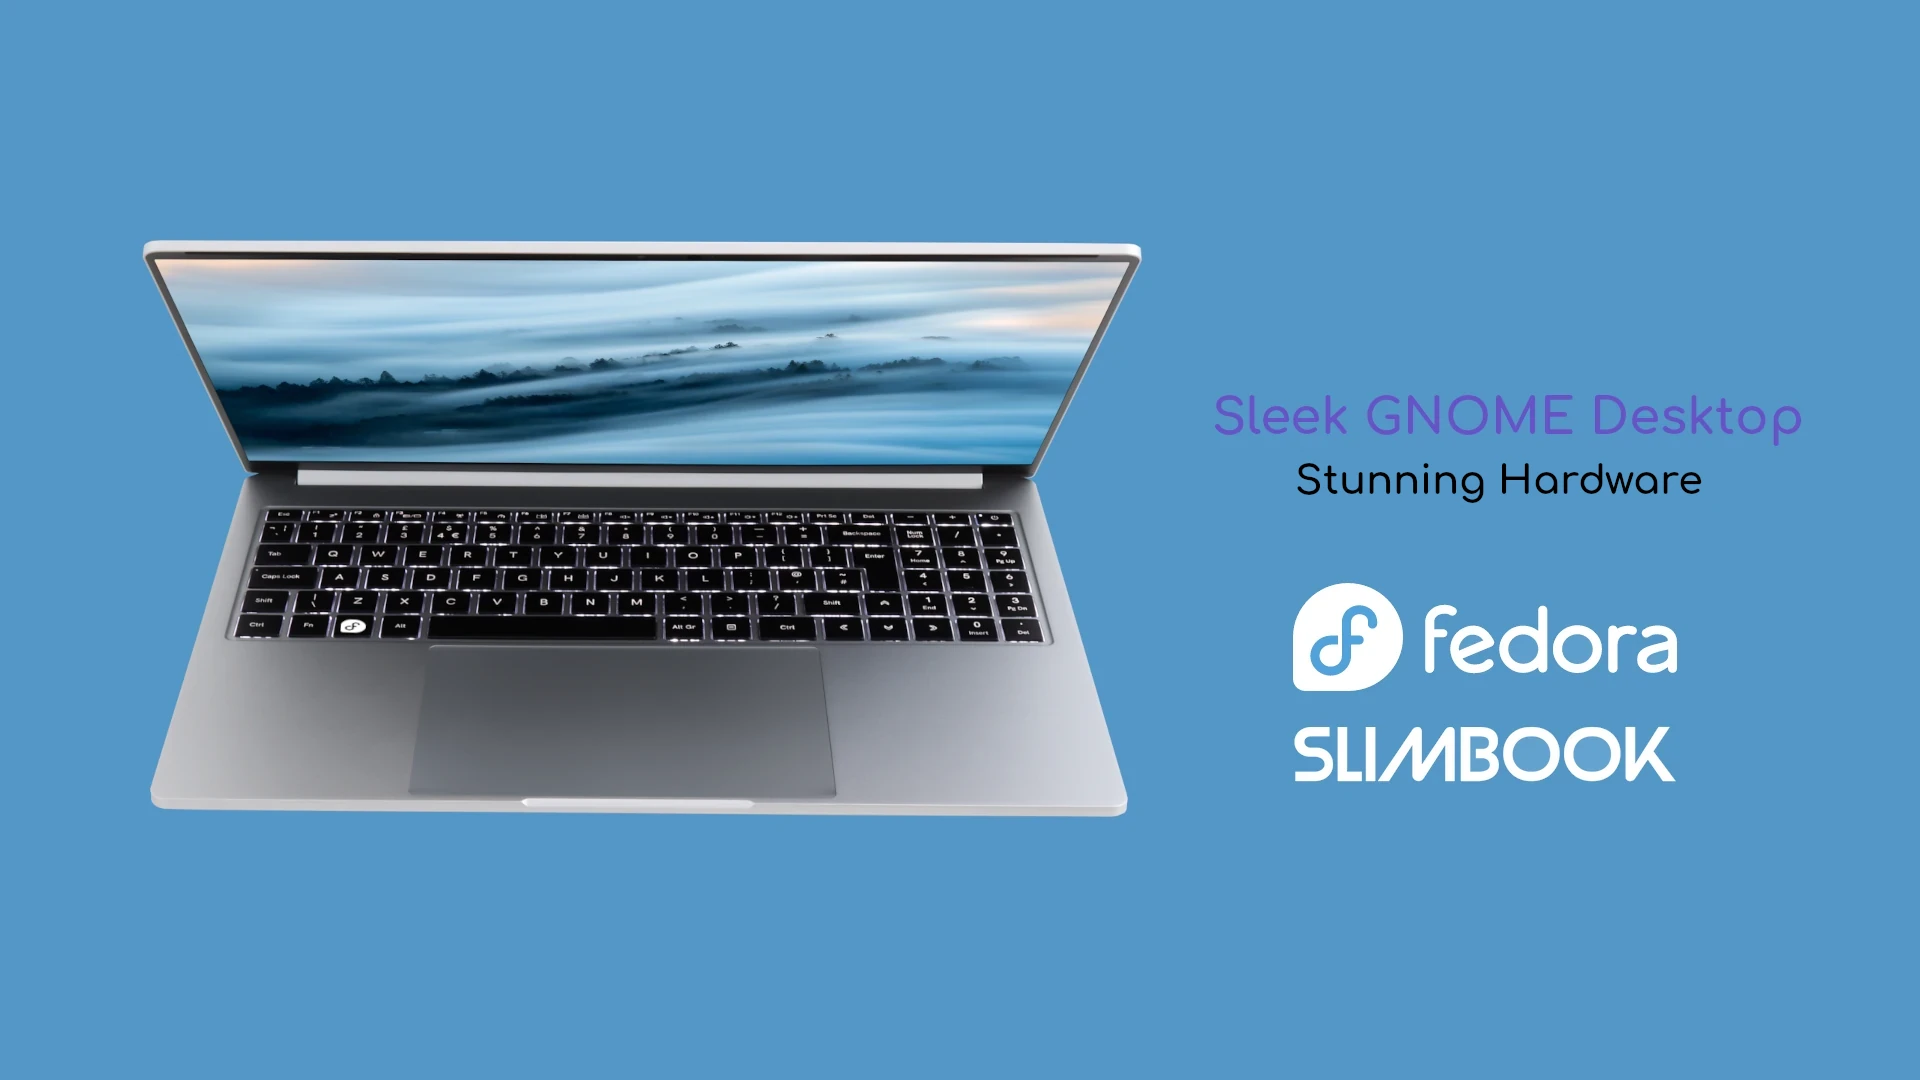 Fedora Slimbook Linux Laptop Launched with 3K Display, NVIDIA RTX 3050 Ti